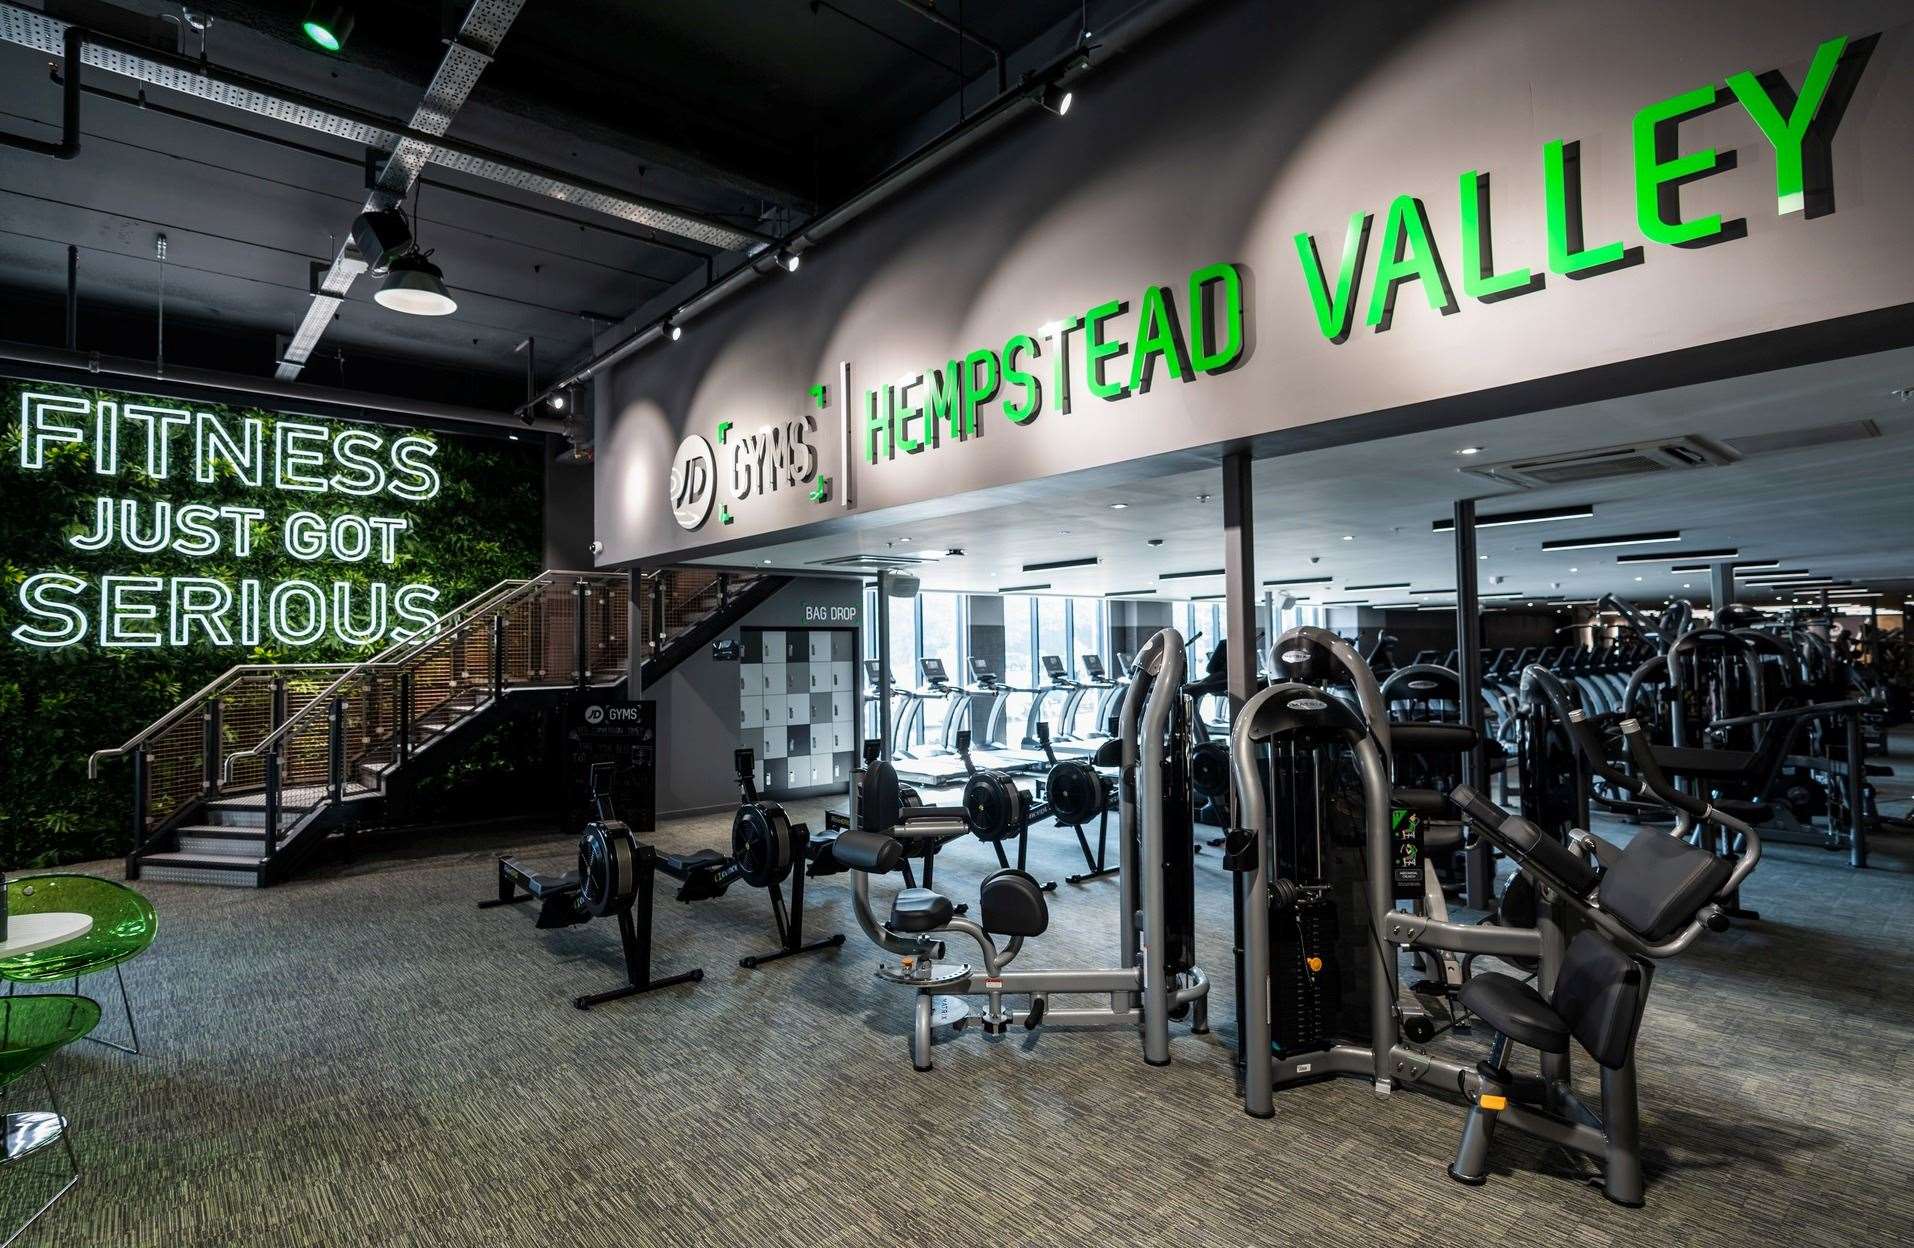 JD Gyms has submitted an application to extend the opening hours of its fitness facility at Hempstead Valley in Gillingham. Photo: Facebook